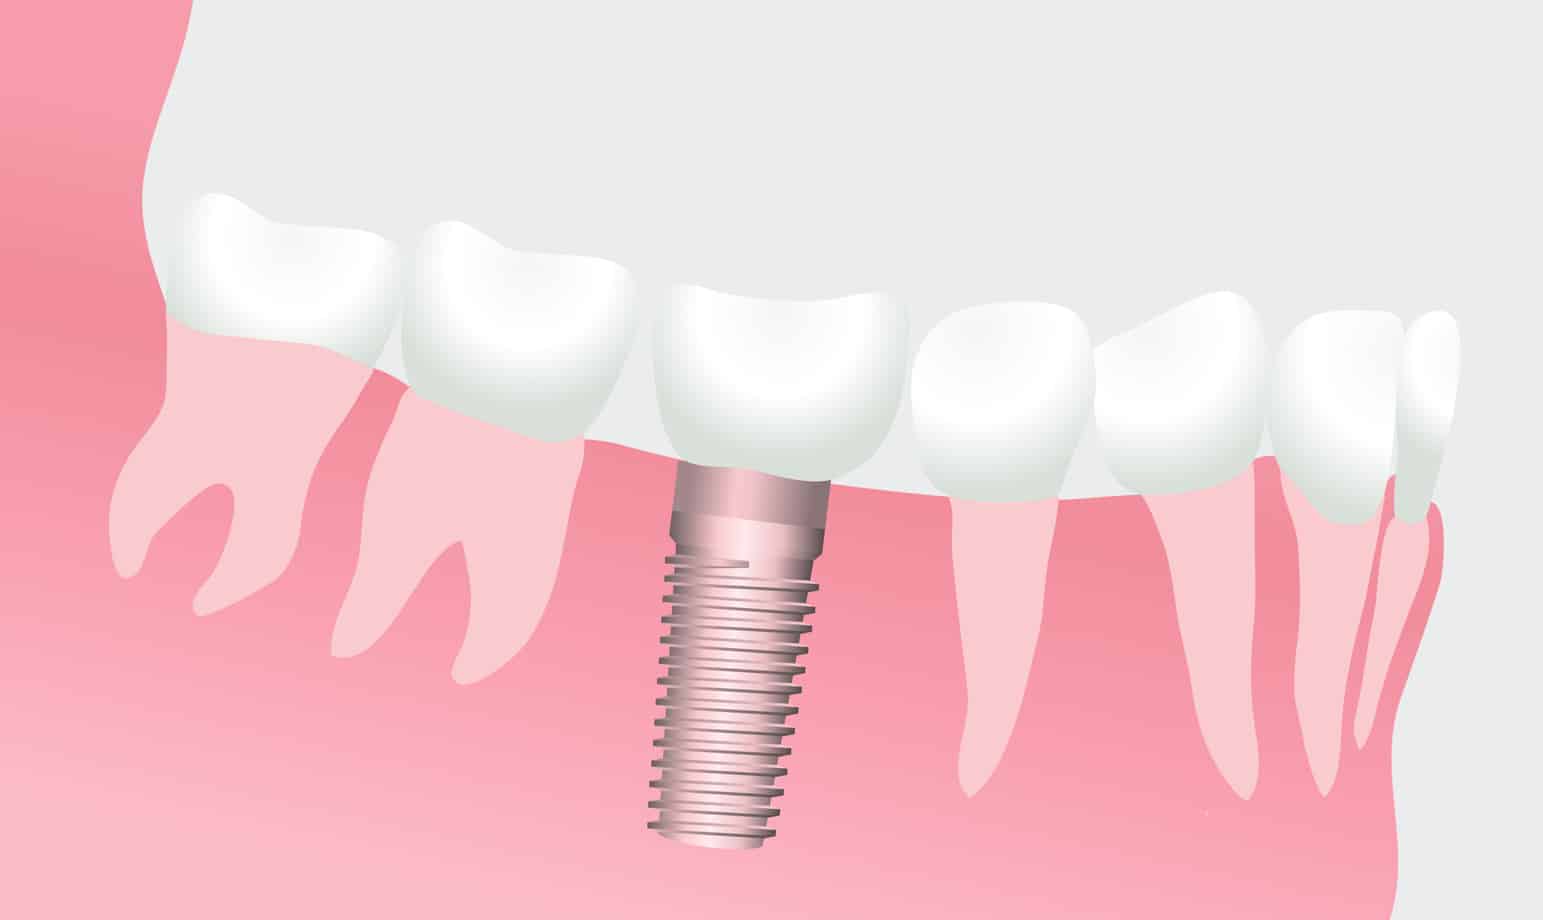 Illustration of a dental implant in a patient's gumline to replace a missing tooth